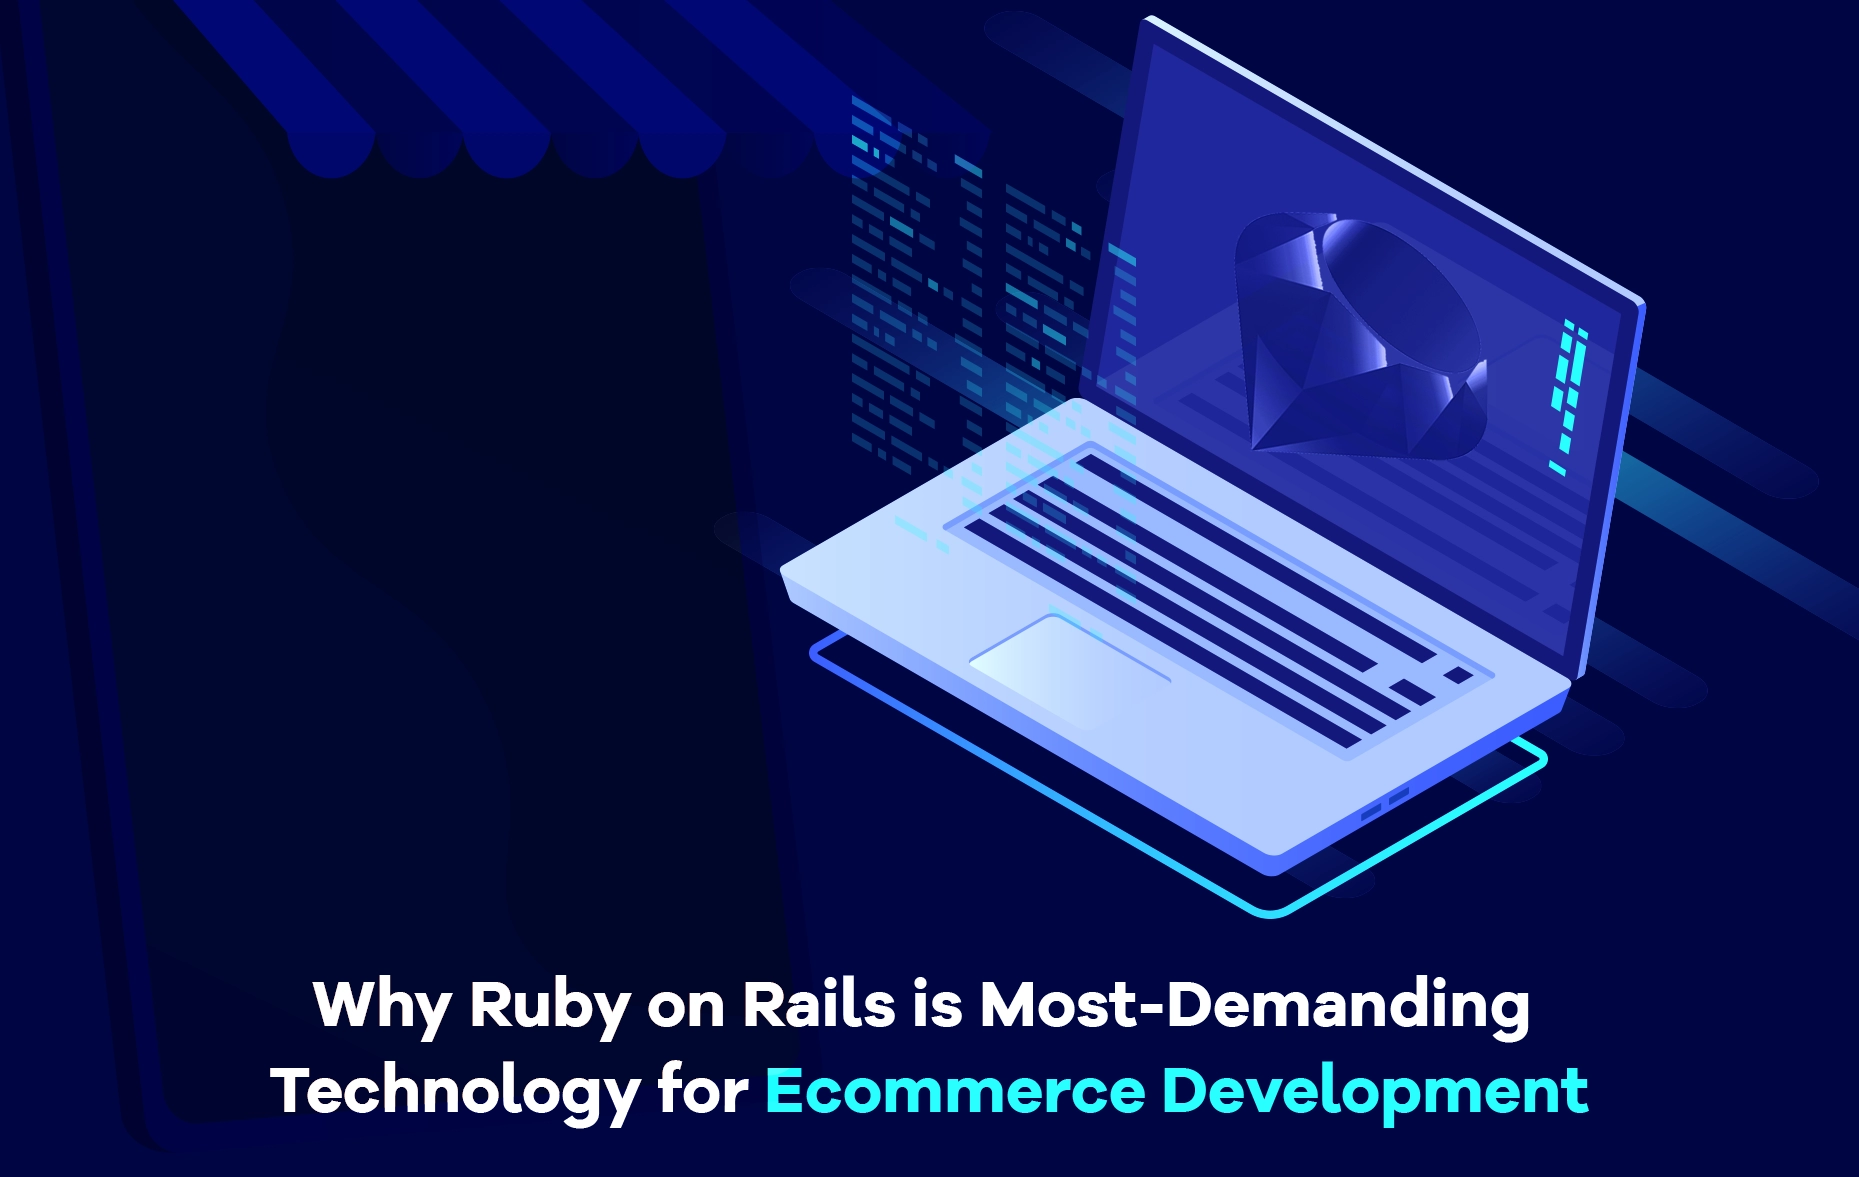 Why Ruby on Rails is Most-Demanding Technology for Ecommerce Development?